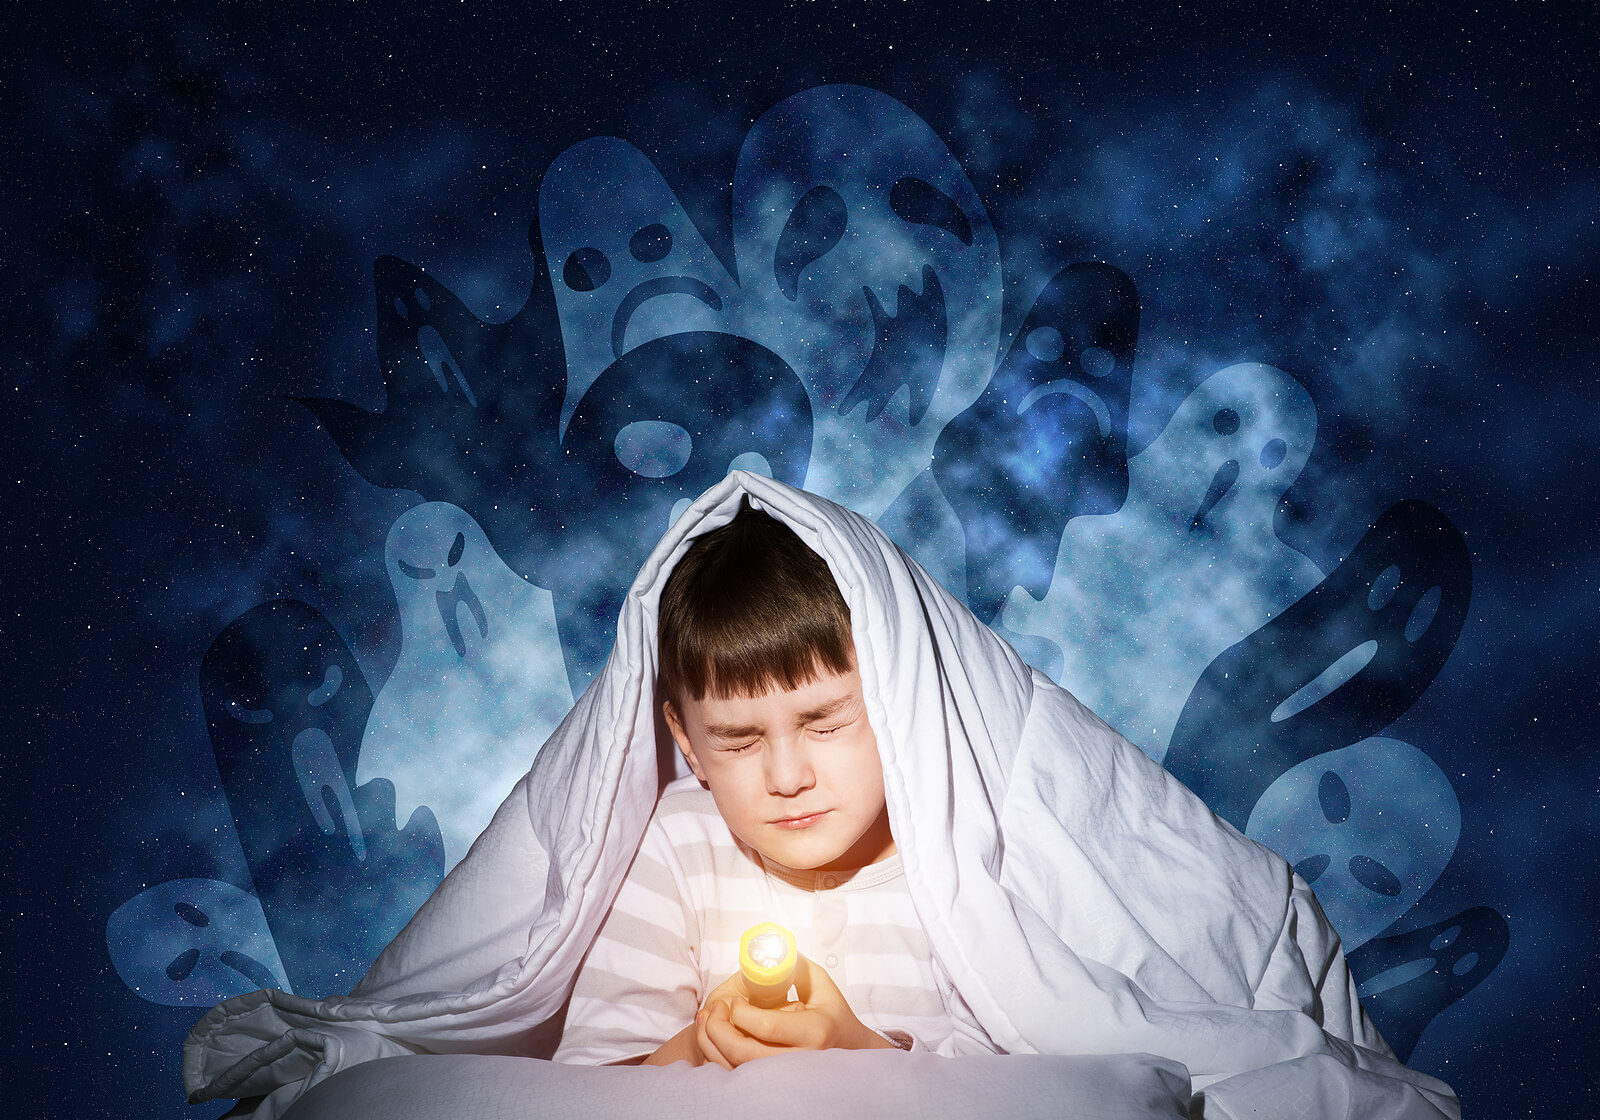 A frightened child in a dark room surrounded by images of ghosts.